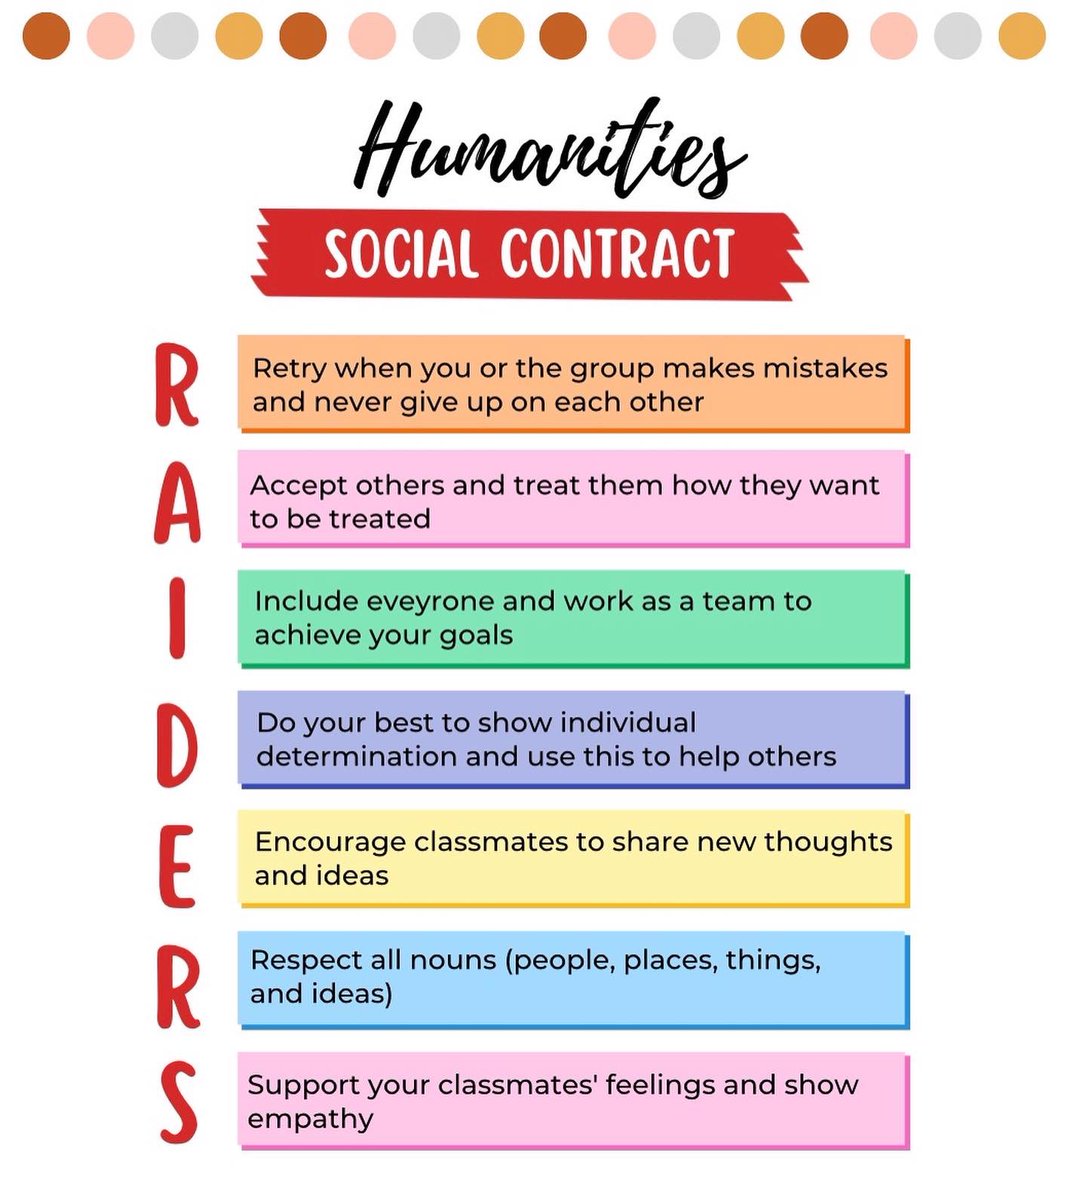 Look at this beautiful 🤩 #socialcontract created by Ss. Pt. 1: What has “stuck” with you to be successful with classmates, Ts, & ourselves. Pt. 2: Groups each get a letter (our mascot is Raiders) to create a commitment statement. Ss will sign soon! #studentvoice👏 #Canva